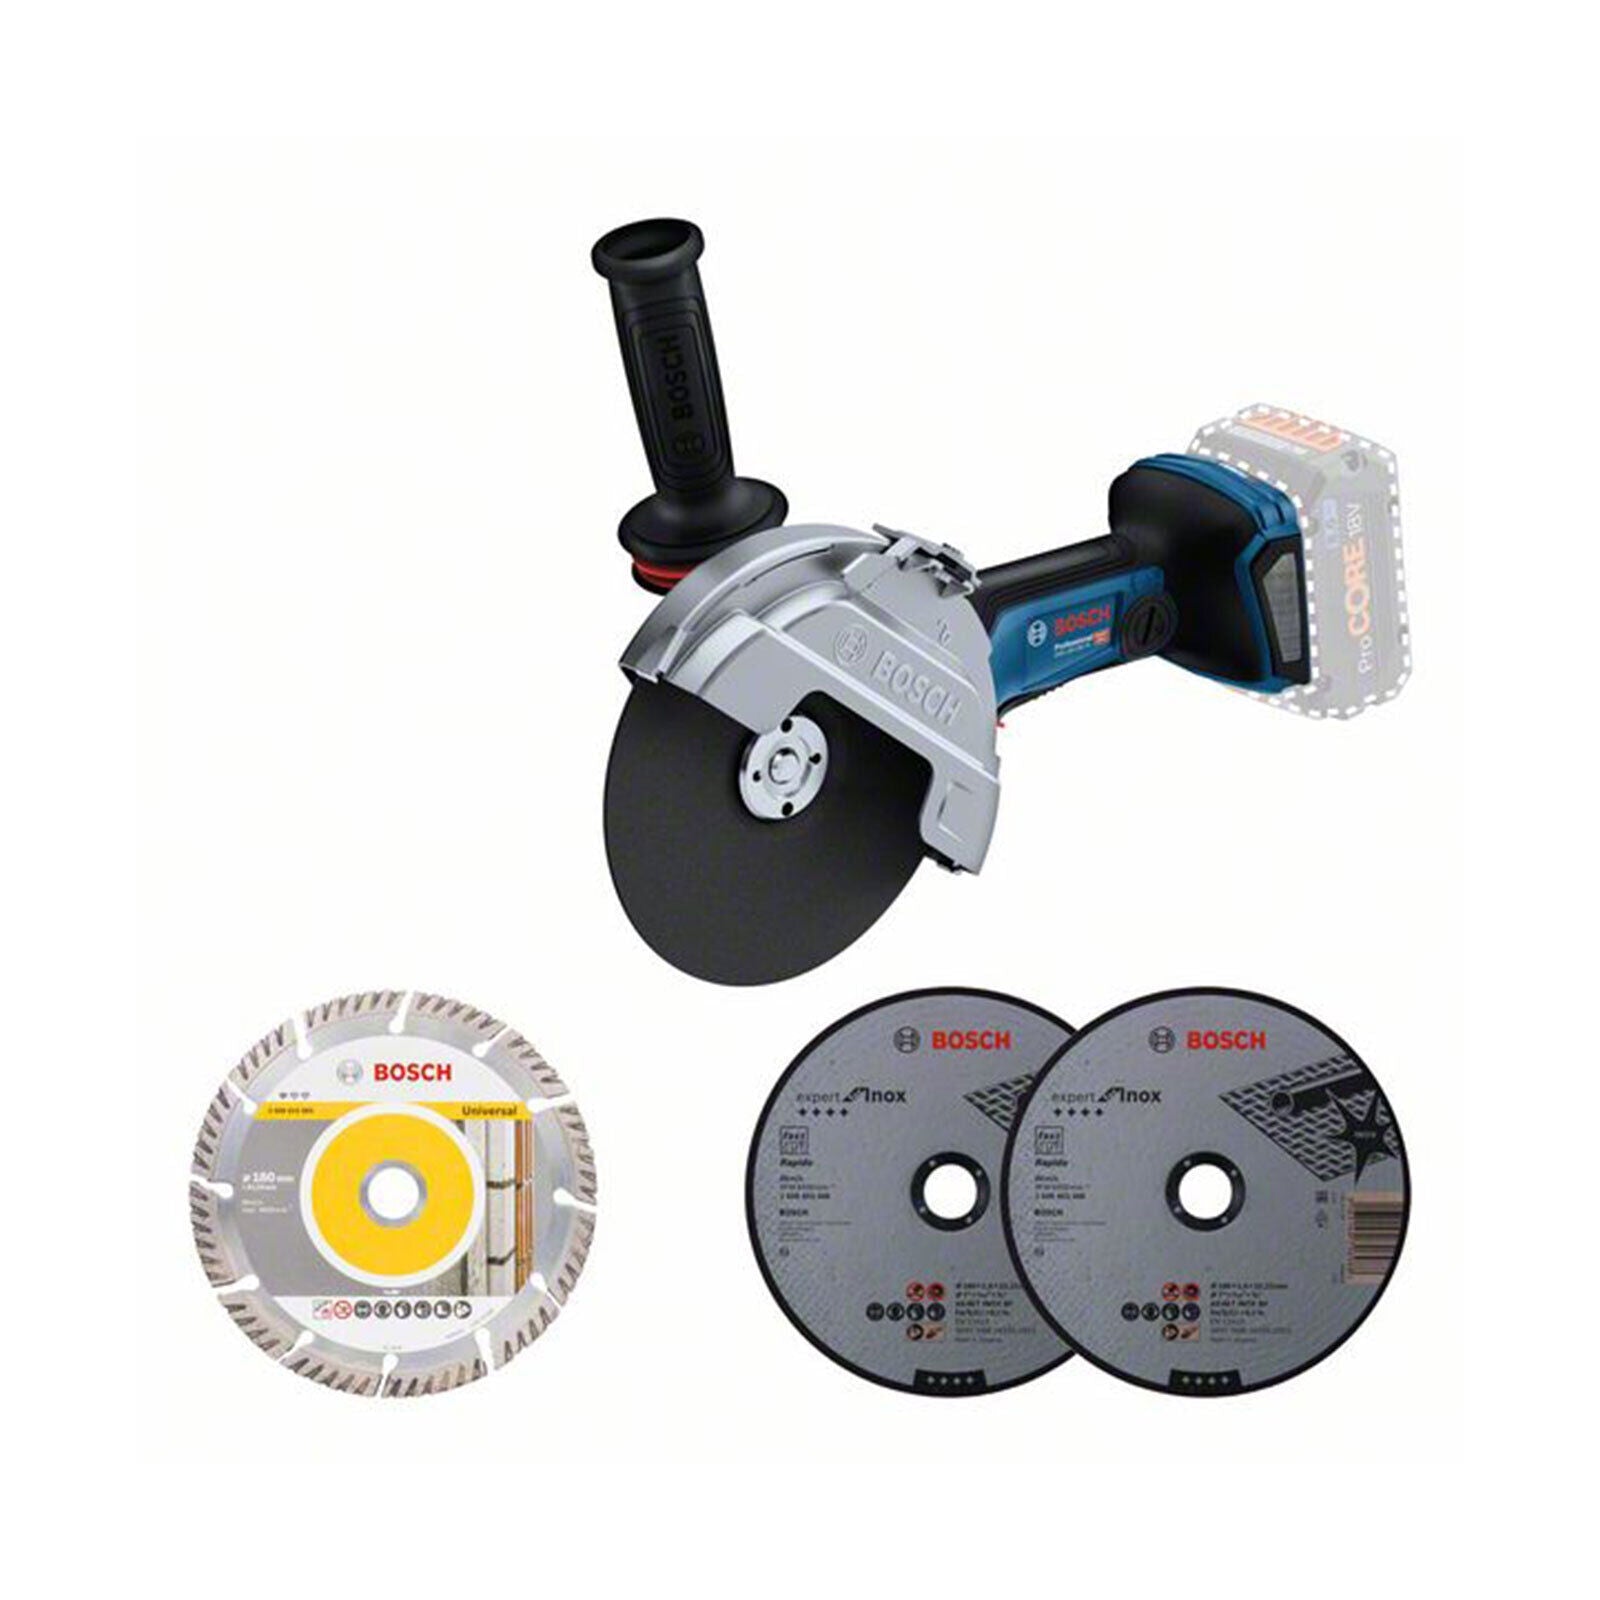 Bosch Professional Cordless Angle Grinder GWS 18V-180 PC 06019H6E01 Power Tool Services